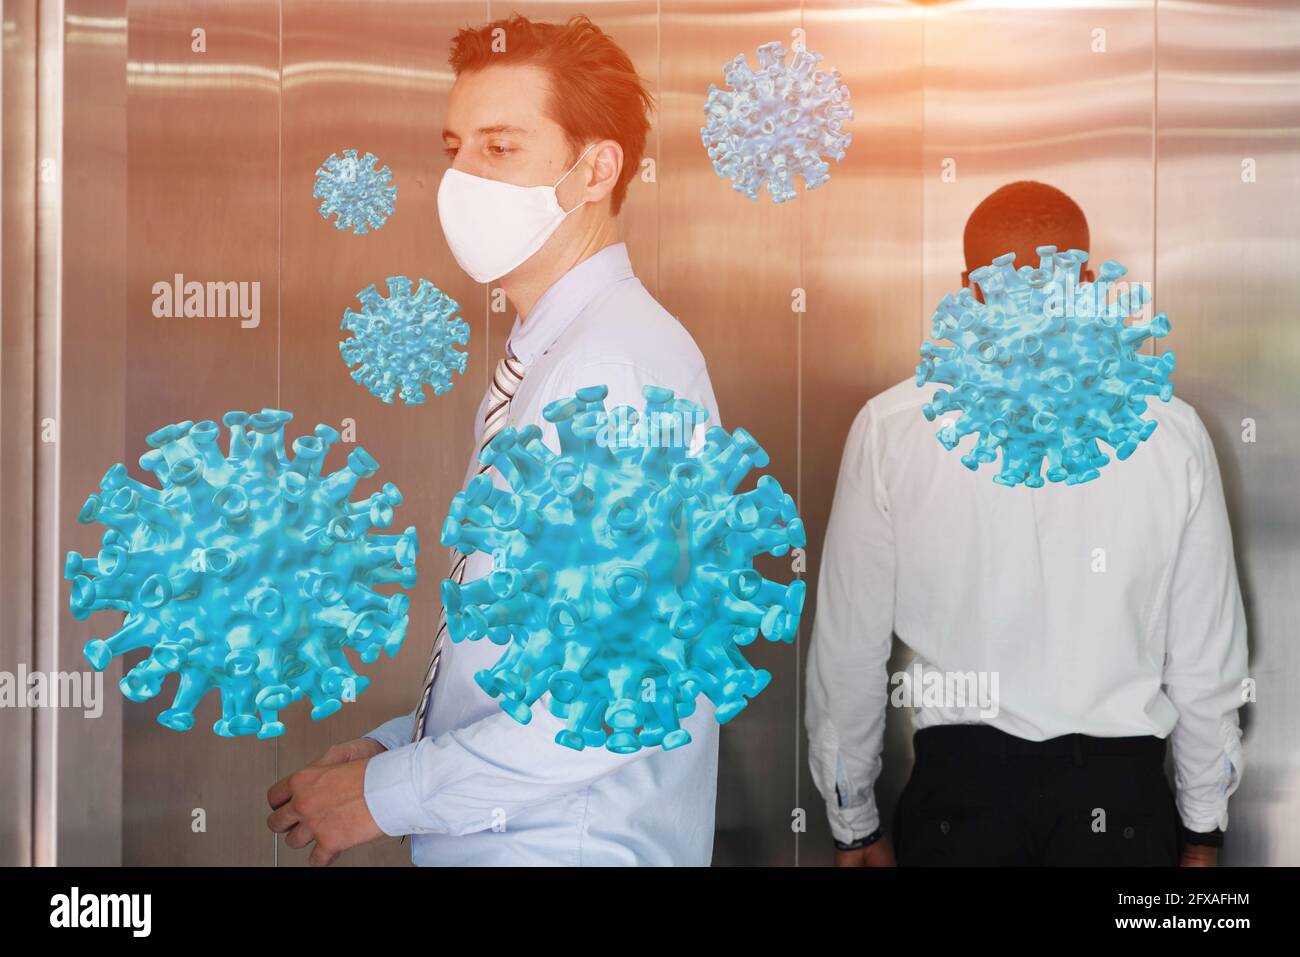 Social distancing in elevators coronavirus outbreak people stay in their zone not face each other. covid 19 protect. 3d virus Stock Photo